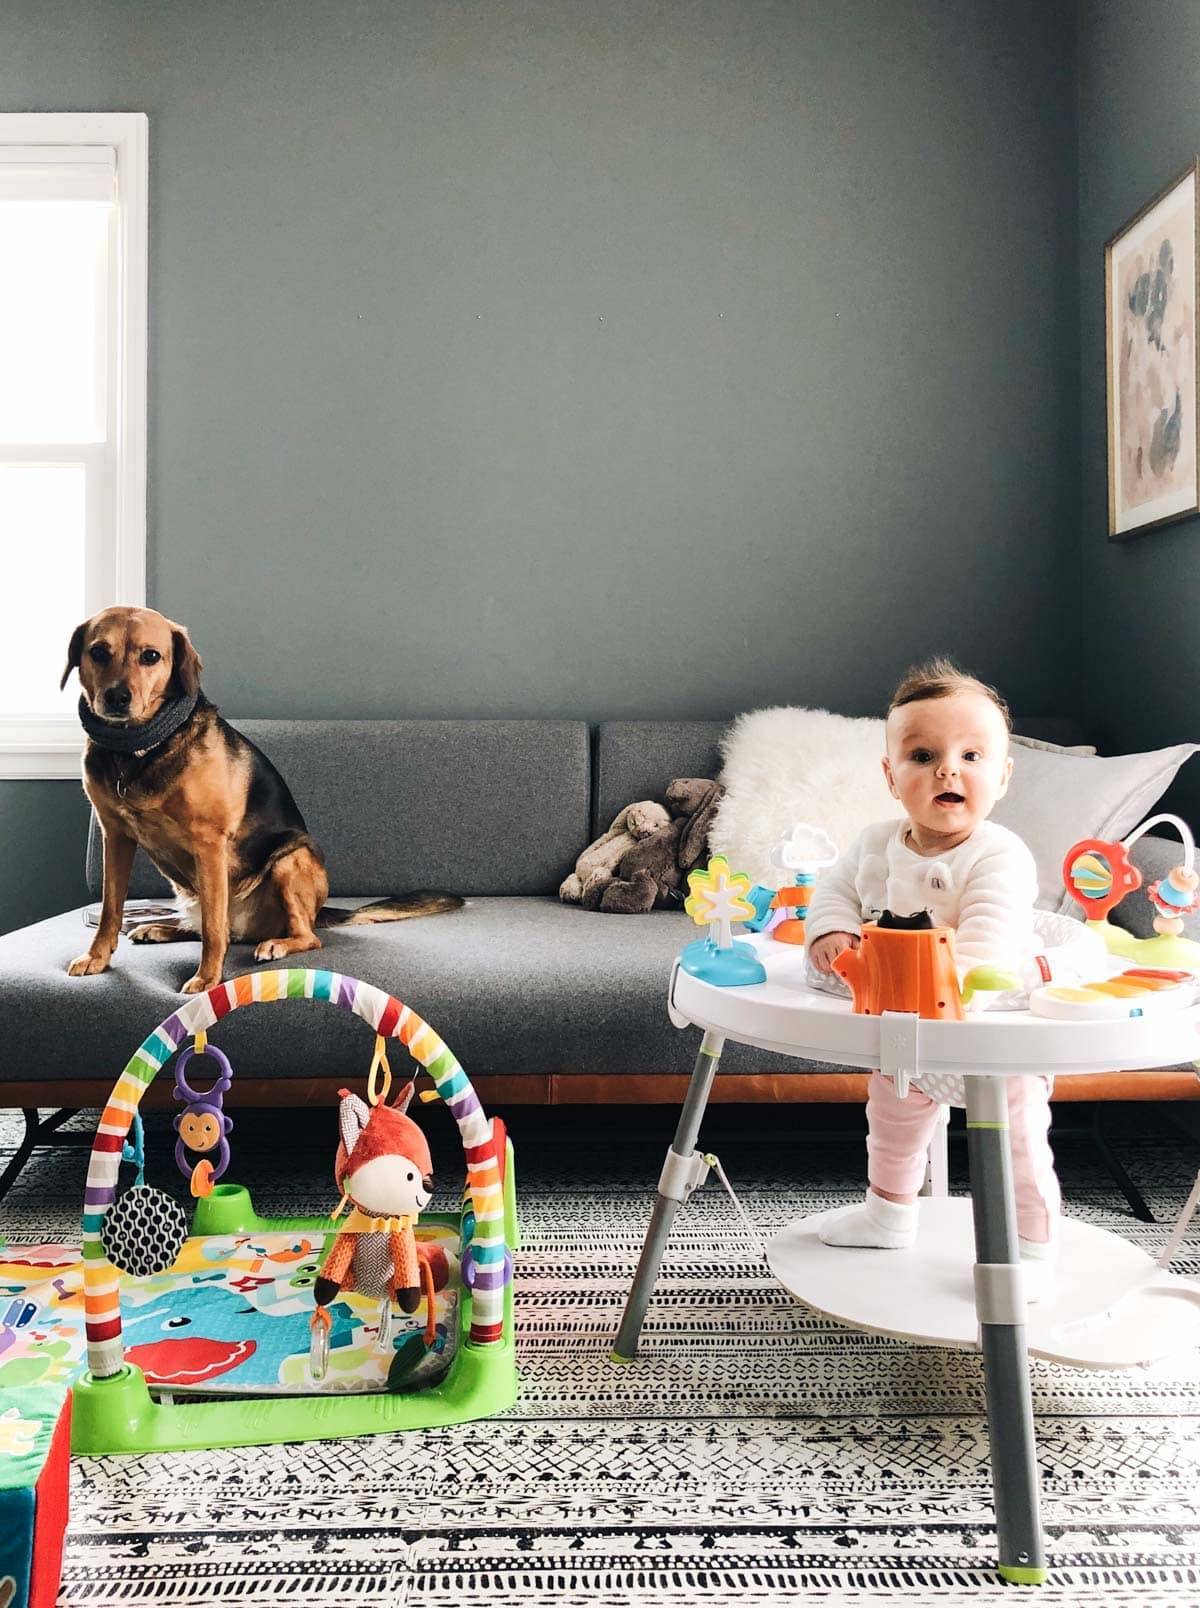 A baby playing in a room with a dog on the couch.